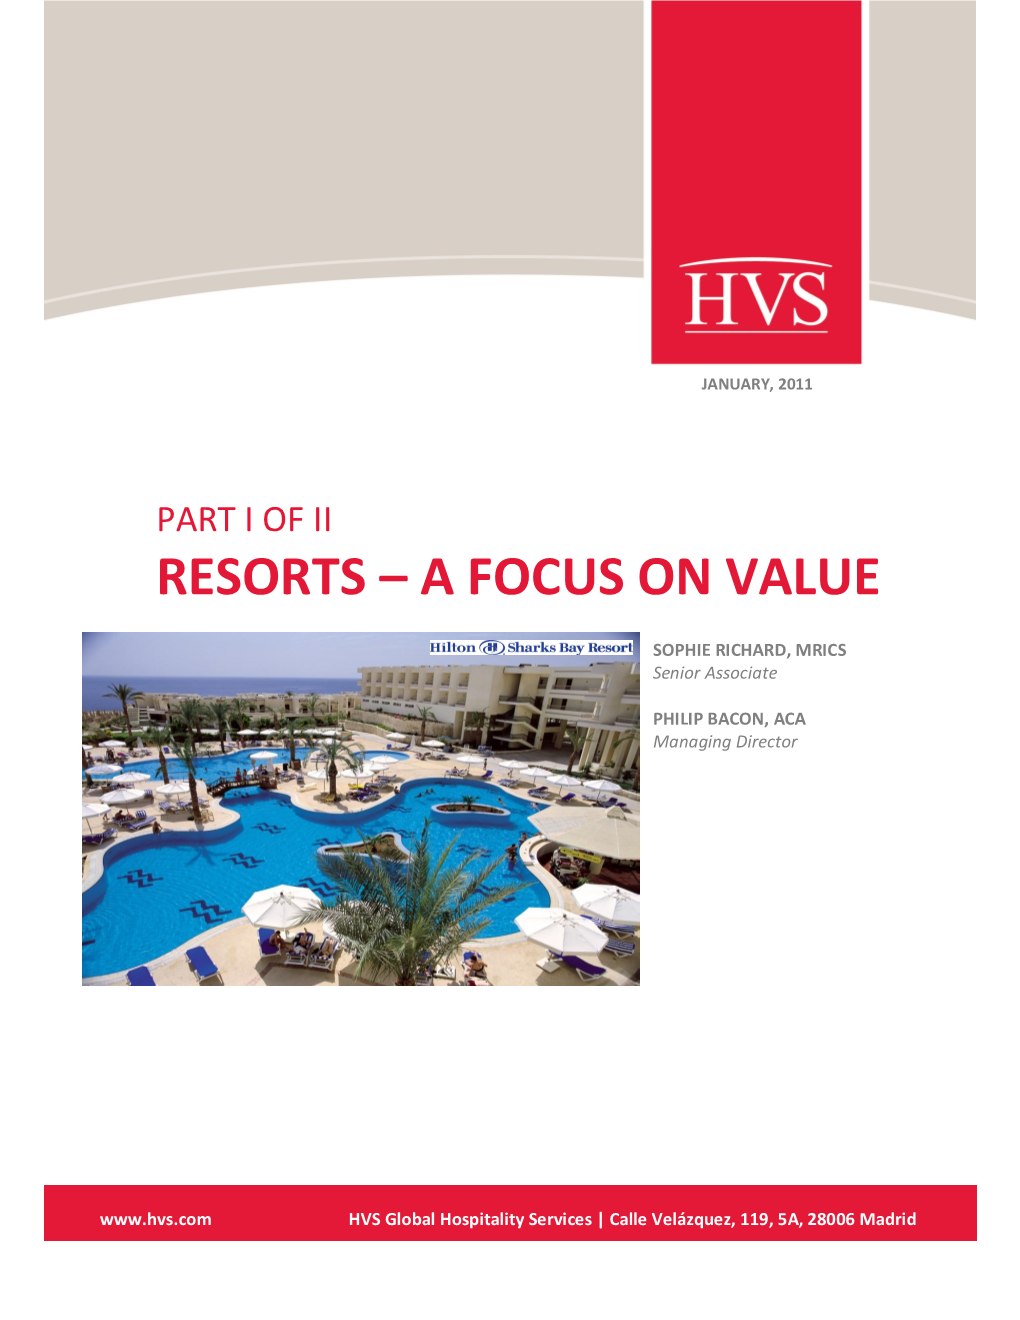 Resorts – a Focus on Value